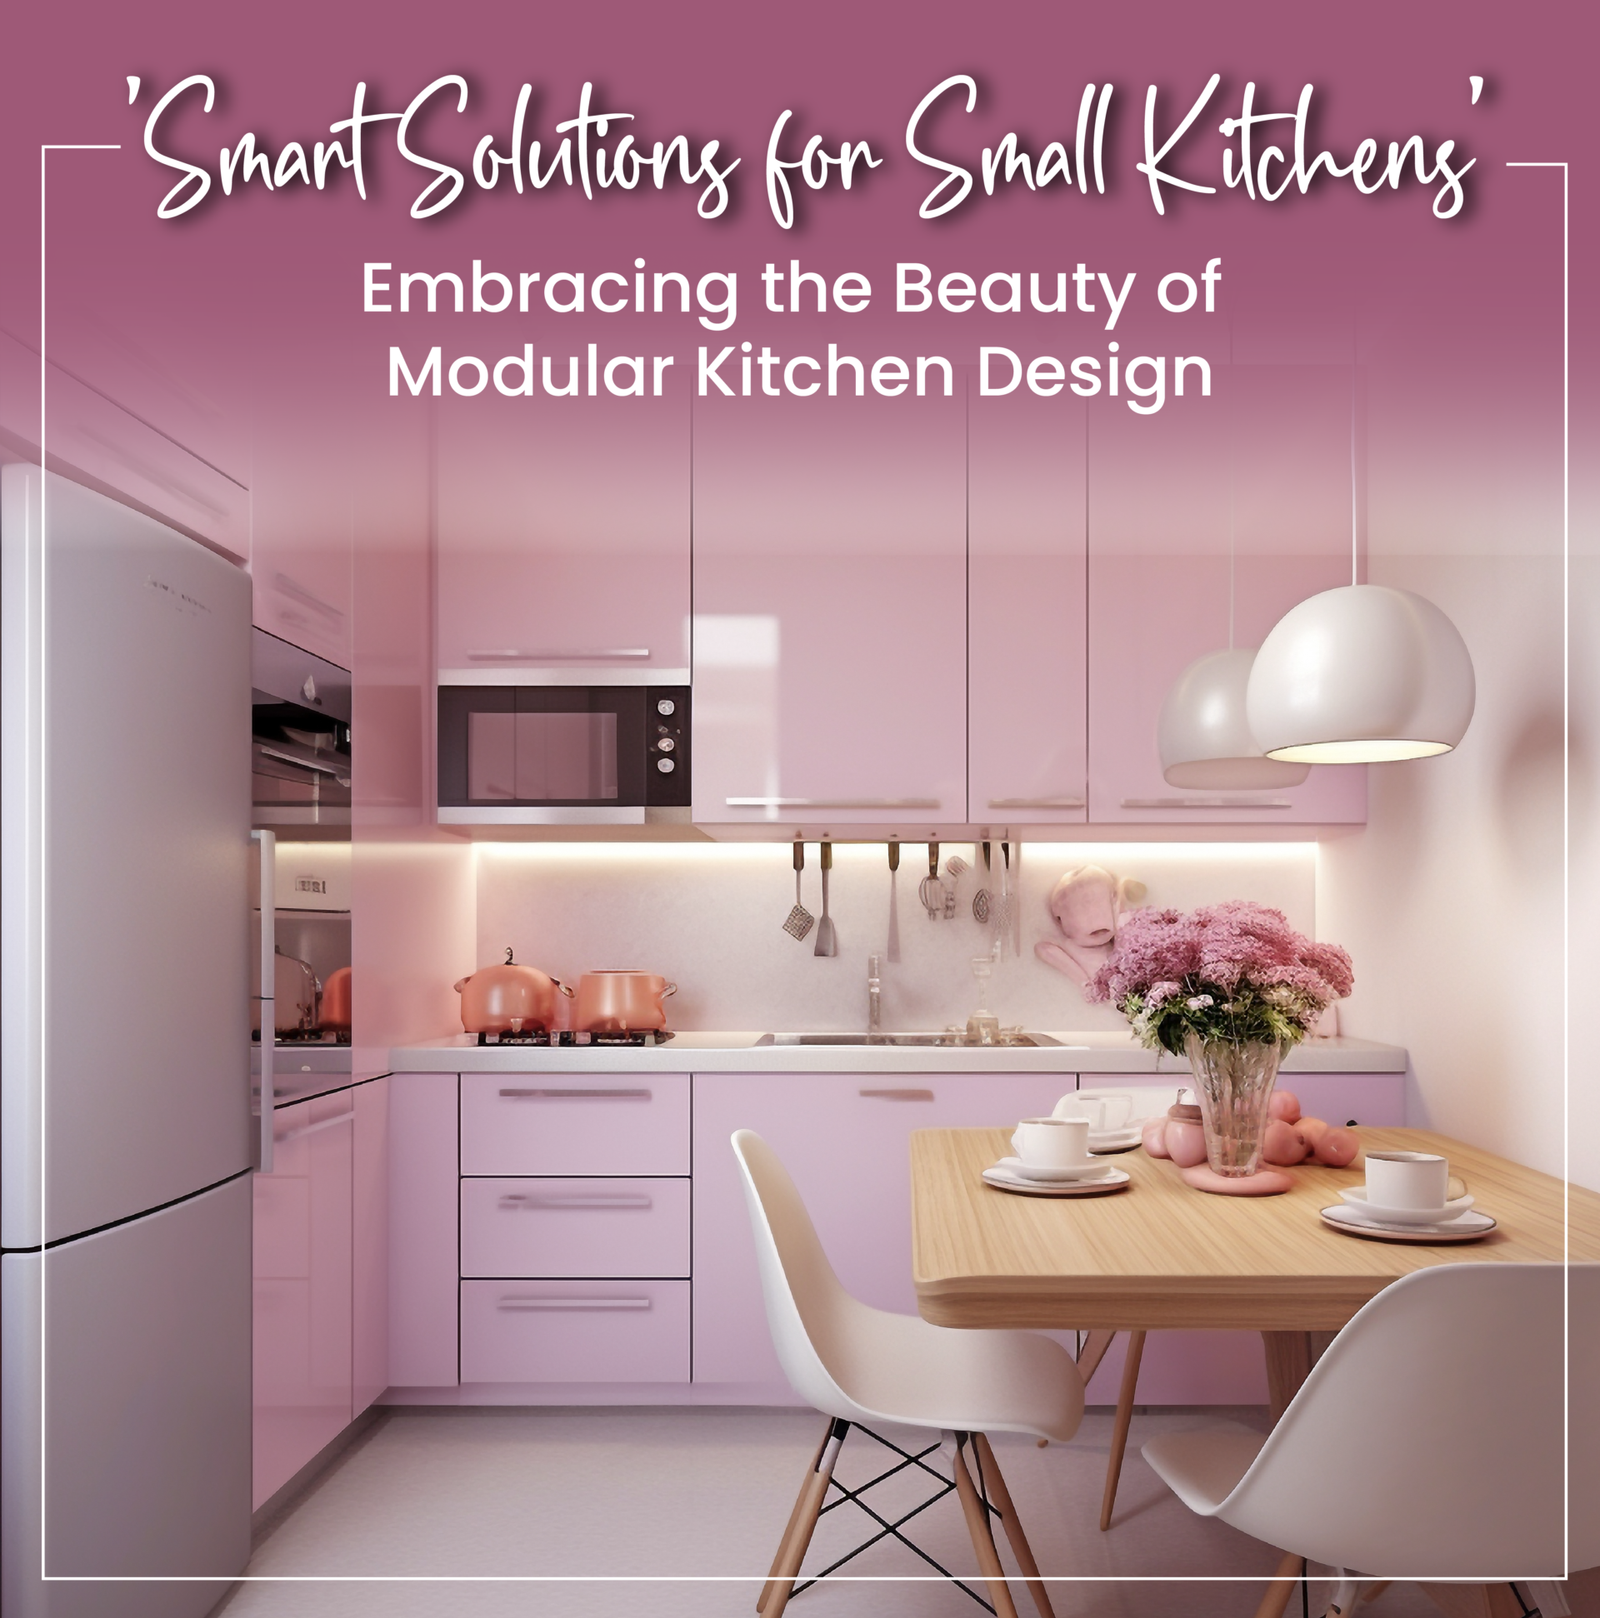 Smart Solutions for Small Kitchens: Embracing the Beauty of Modular Kitchen Design